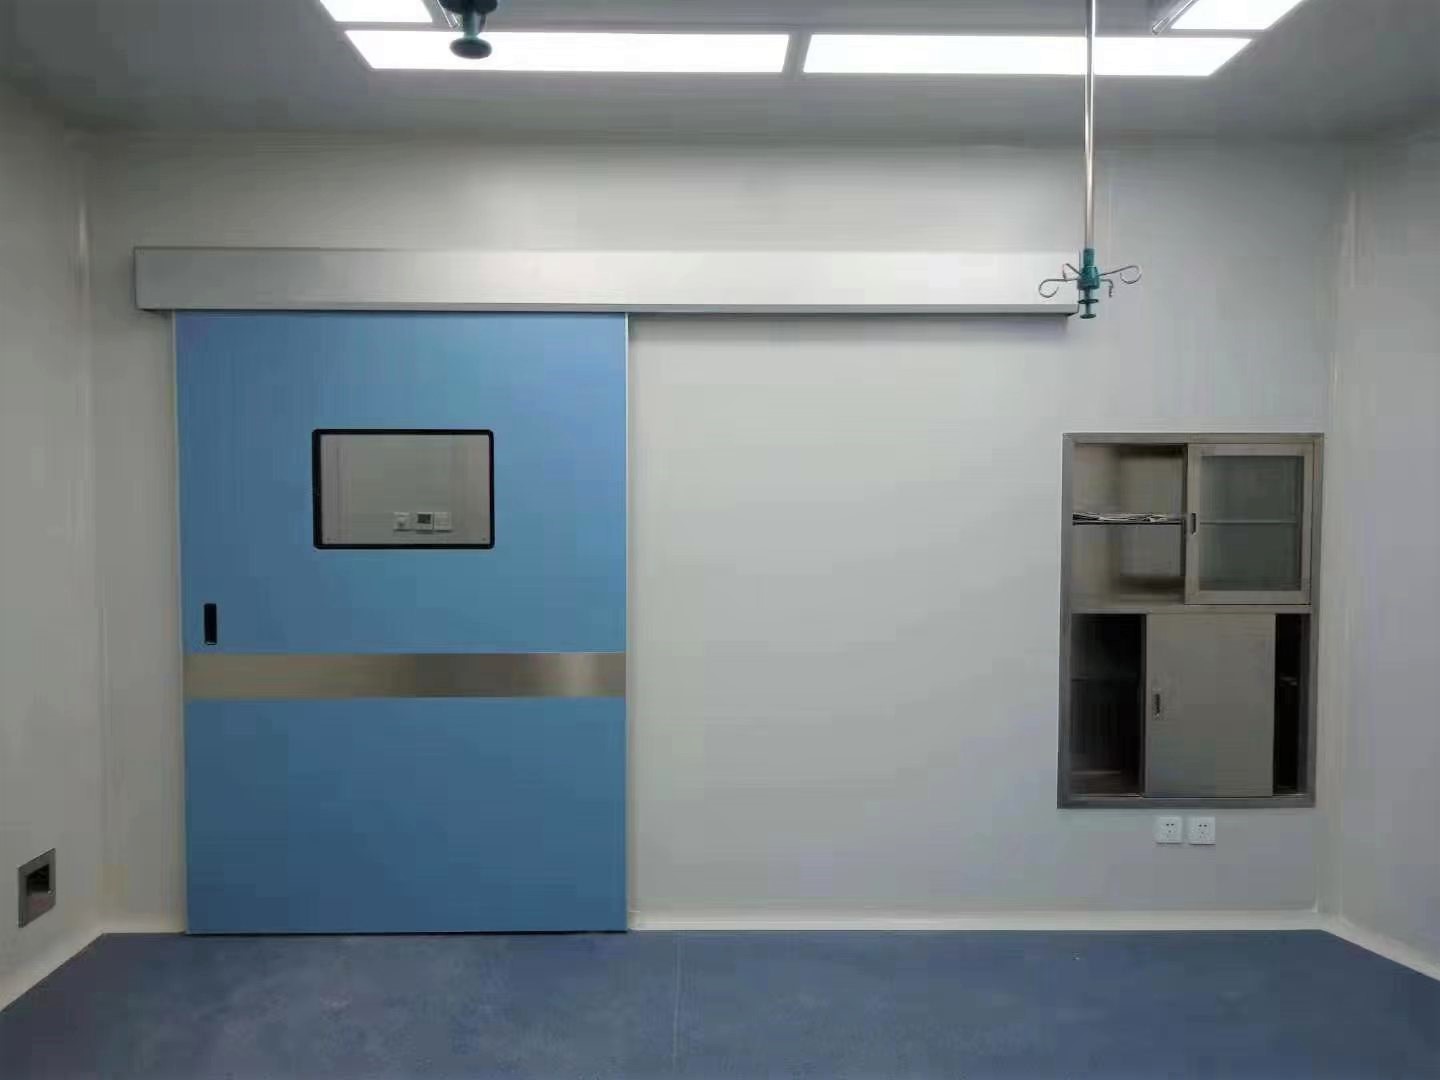 BRIEF INTRODUCTION TO CLEAN ROOM ELECTRIC SLIDING DOOR